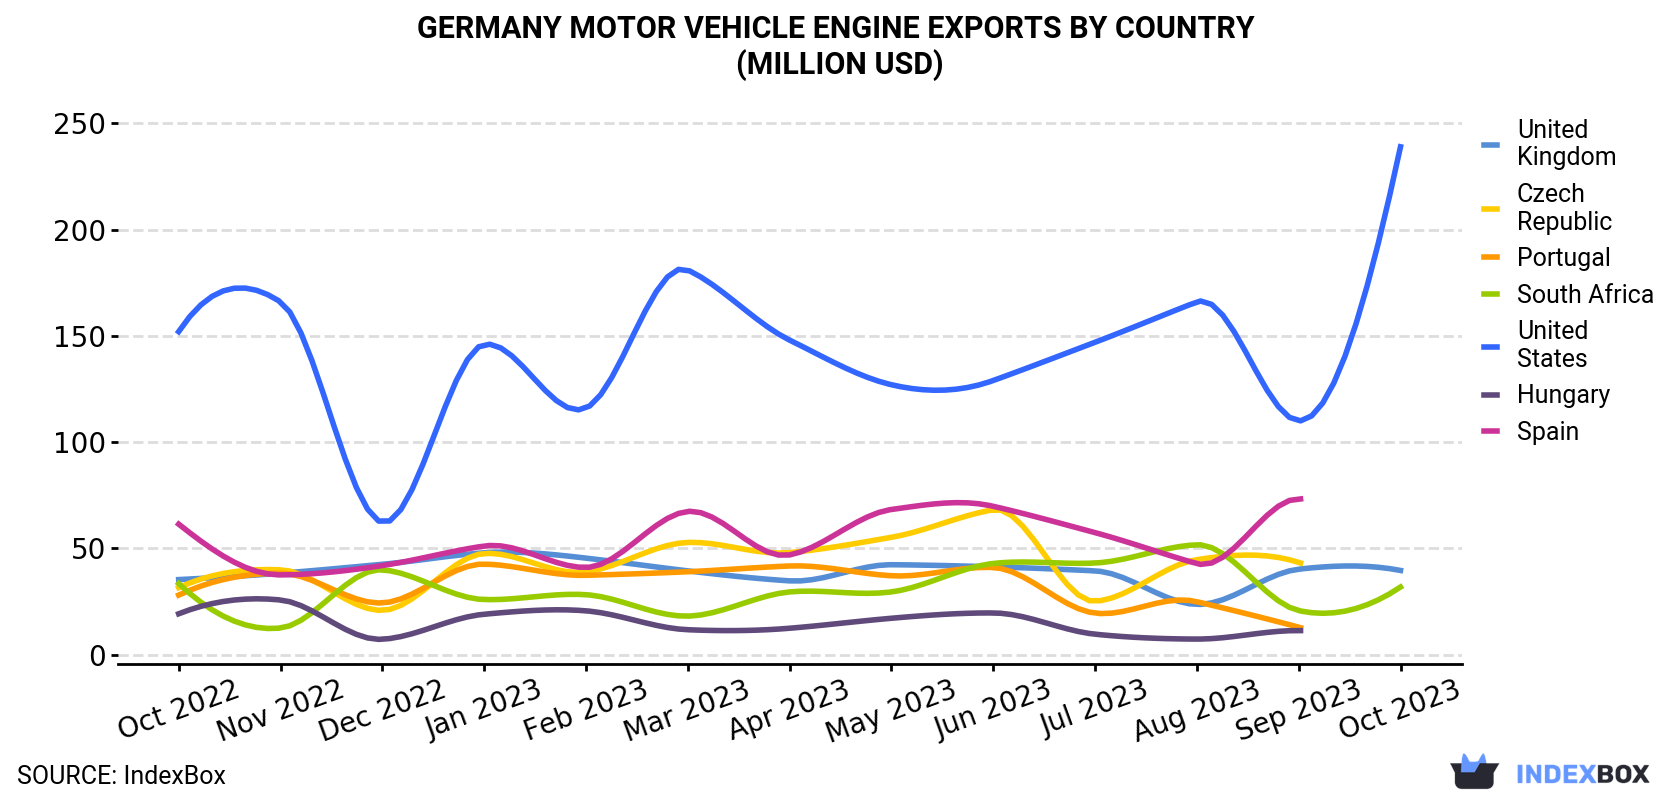 Germany Motor Vehicle Engine Exports By Country (Million USD)